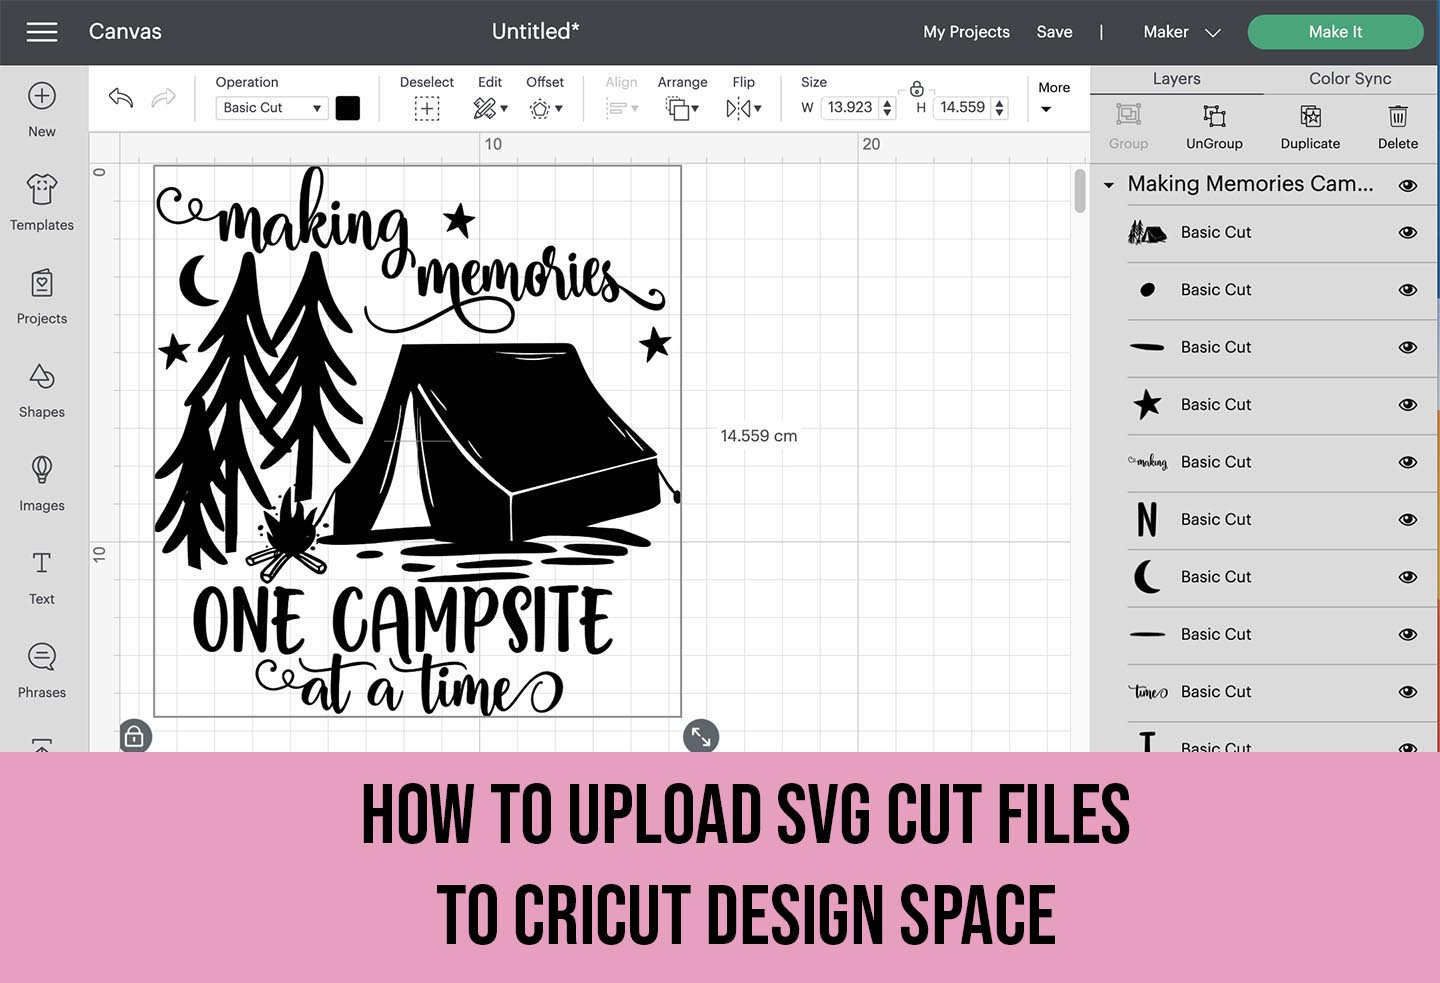 How to upload SVG files to Cricut Design Space.